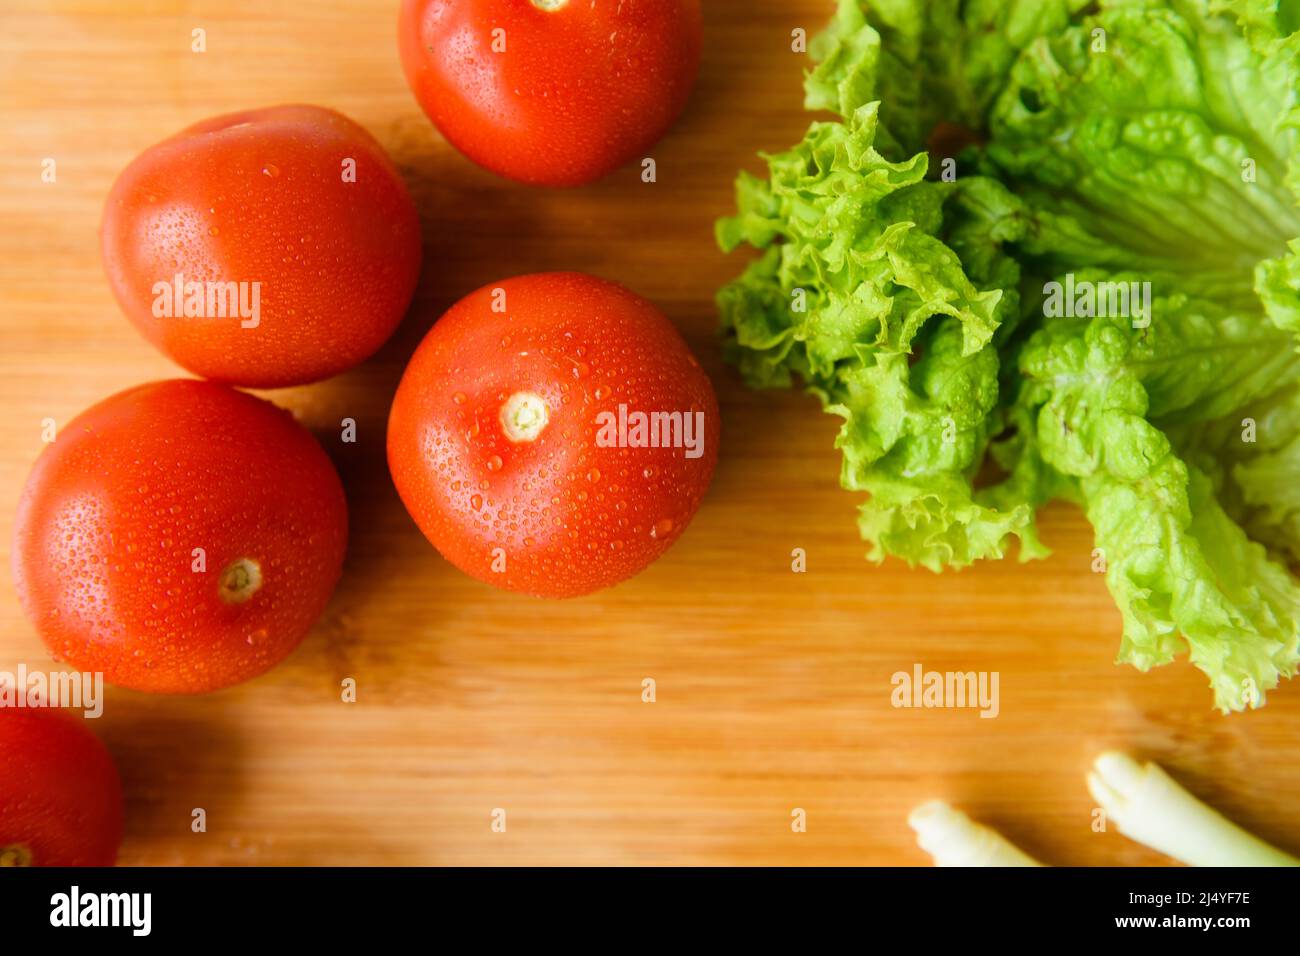 Fresh vegetables for salad lie on a wooden table with a cutting board. Top view. Close-up. Stock Photo